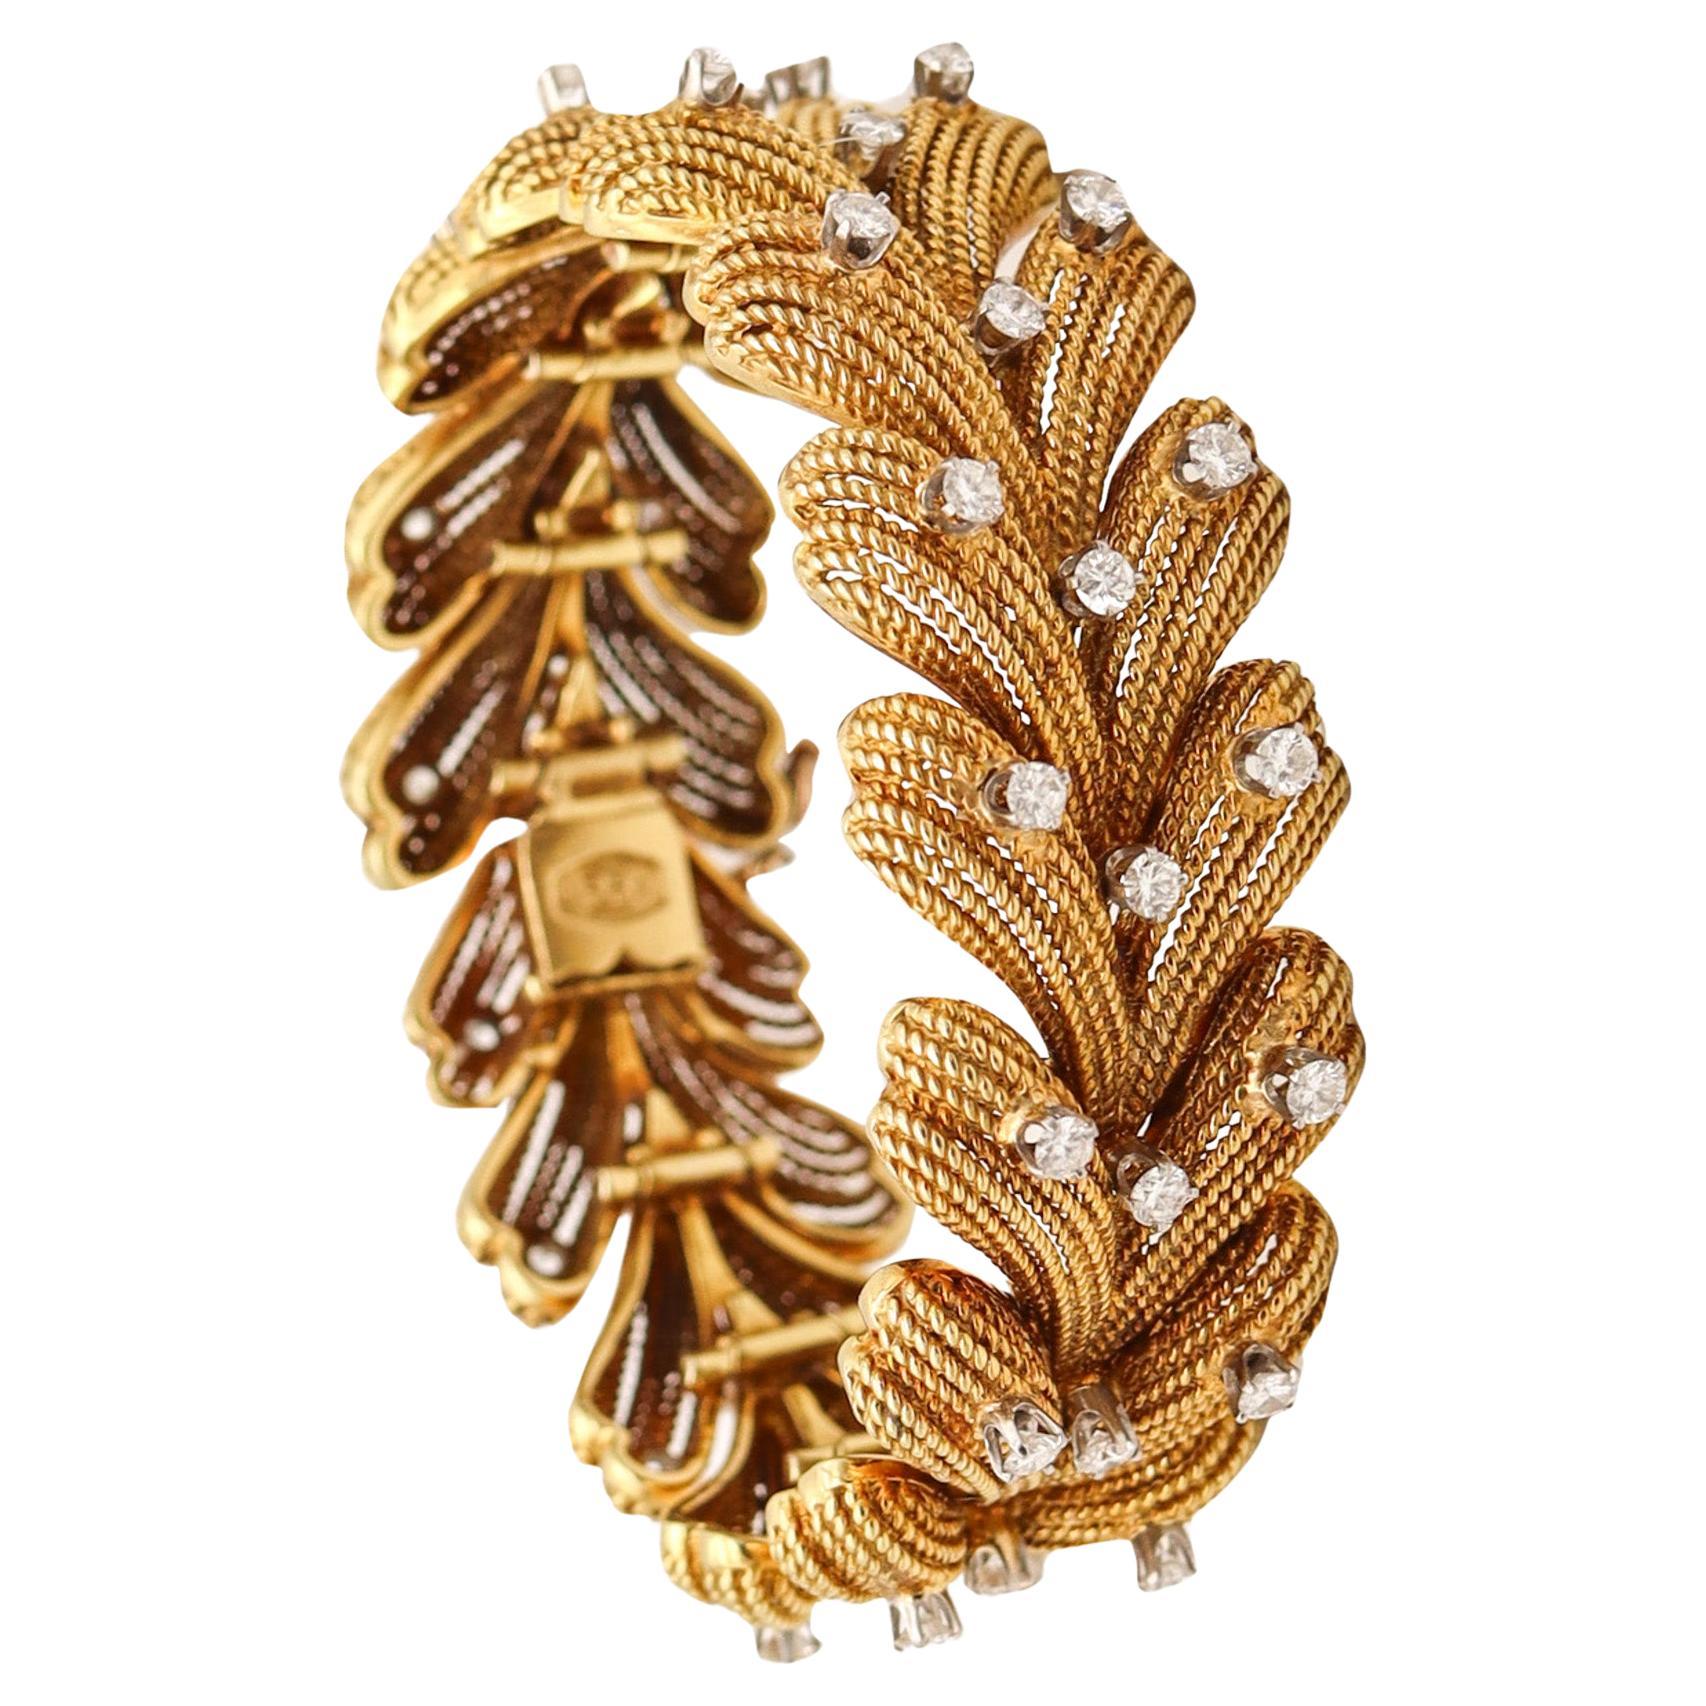 La Triomphe 1970 Modernist Wired Bracelet 18Kt Gold With 4.50 Ctw In Diamonds